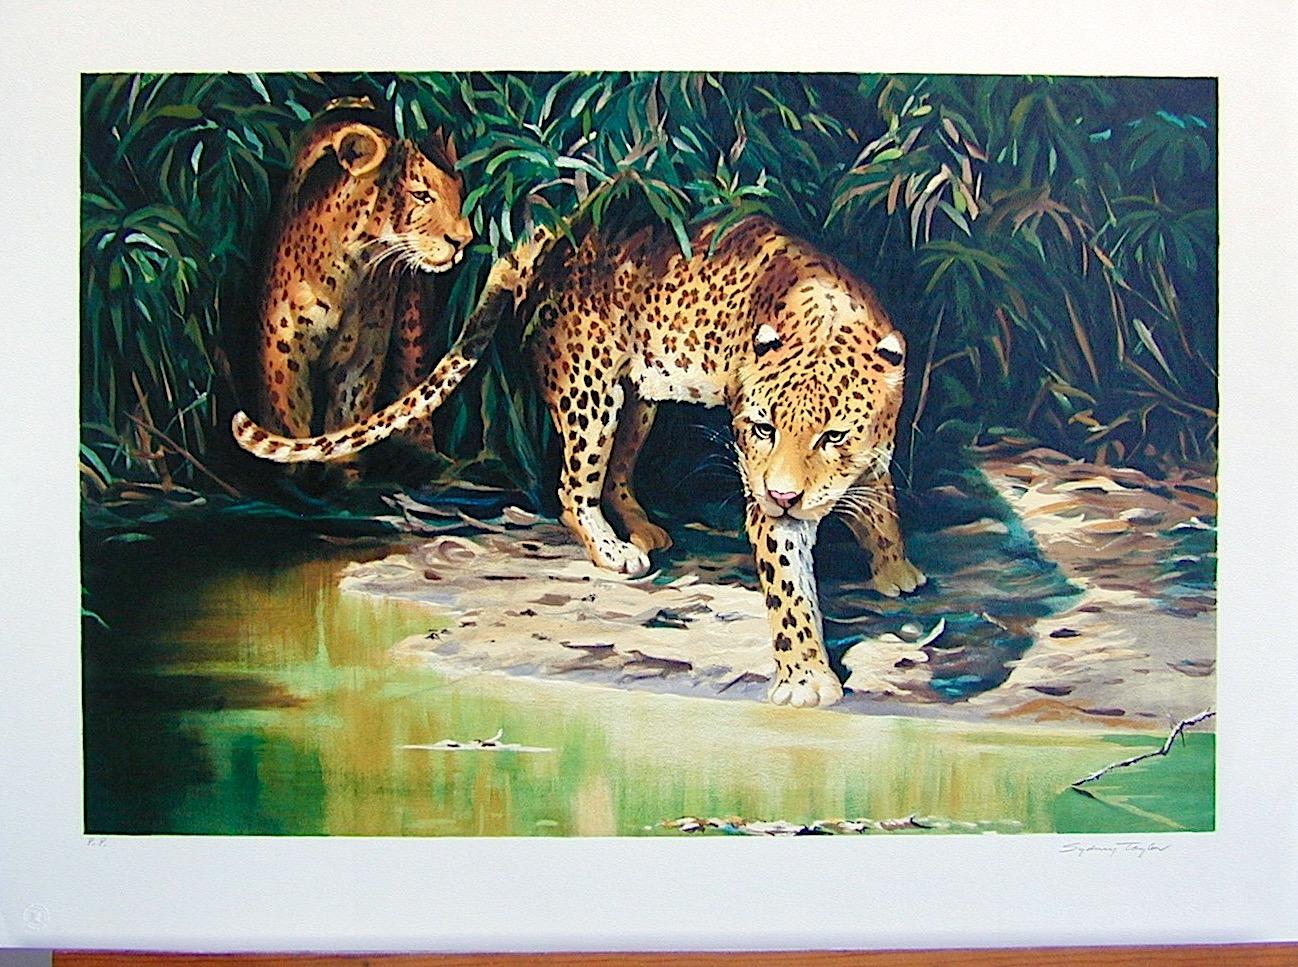 OUT OF THE SHADOWS Signed Lithograph, Leopard Portrait, Jungle Animals, Wildlife - Black Animal Print by Sydney Taylor